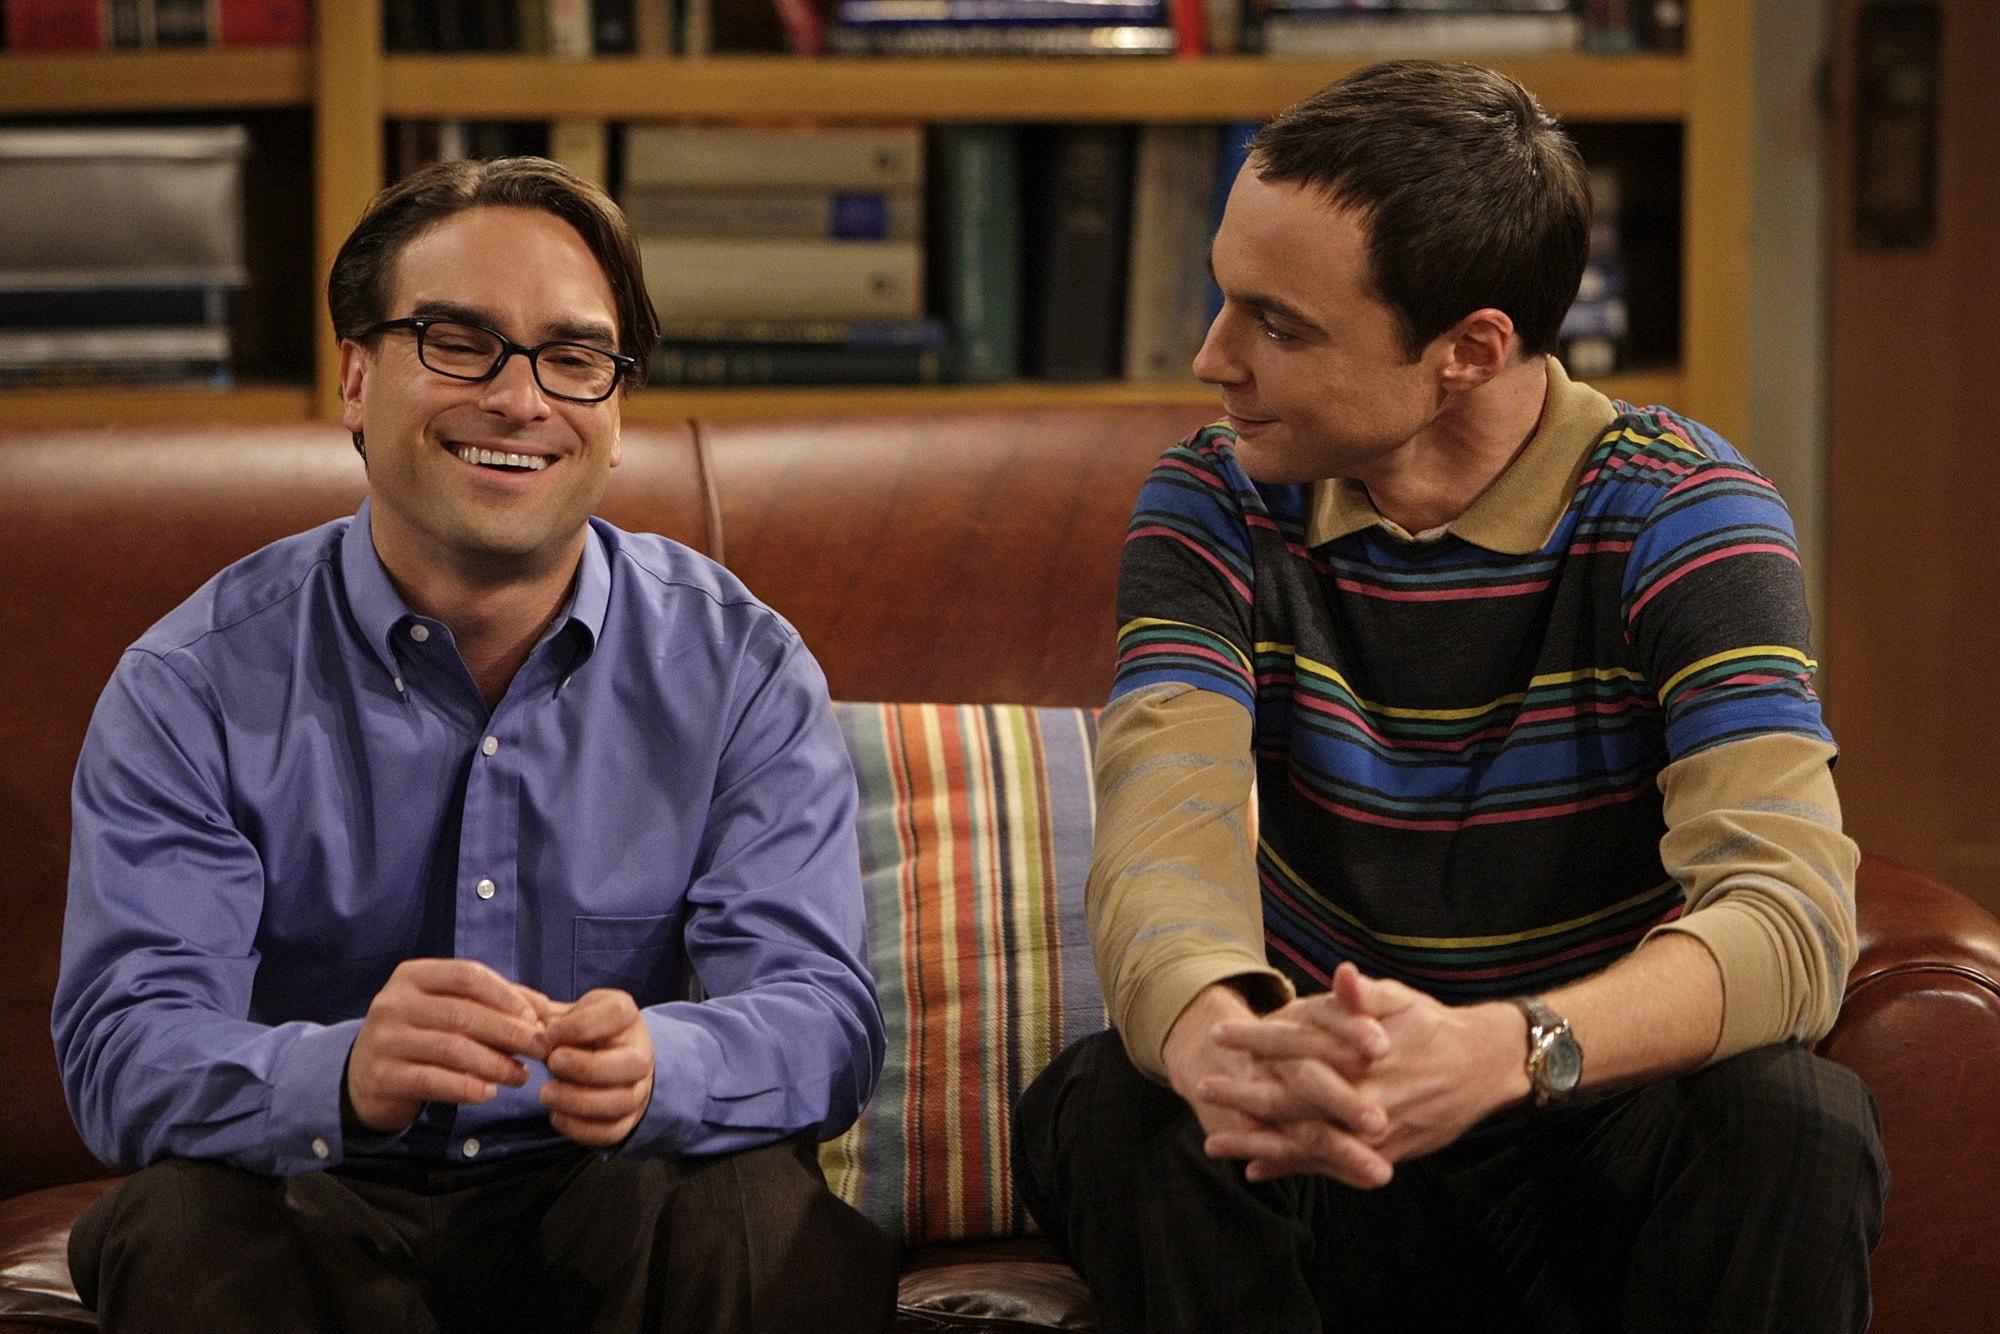 Leonard Hofstadter and Sheldon Cooper sit on the couch in their apartment in an episode of